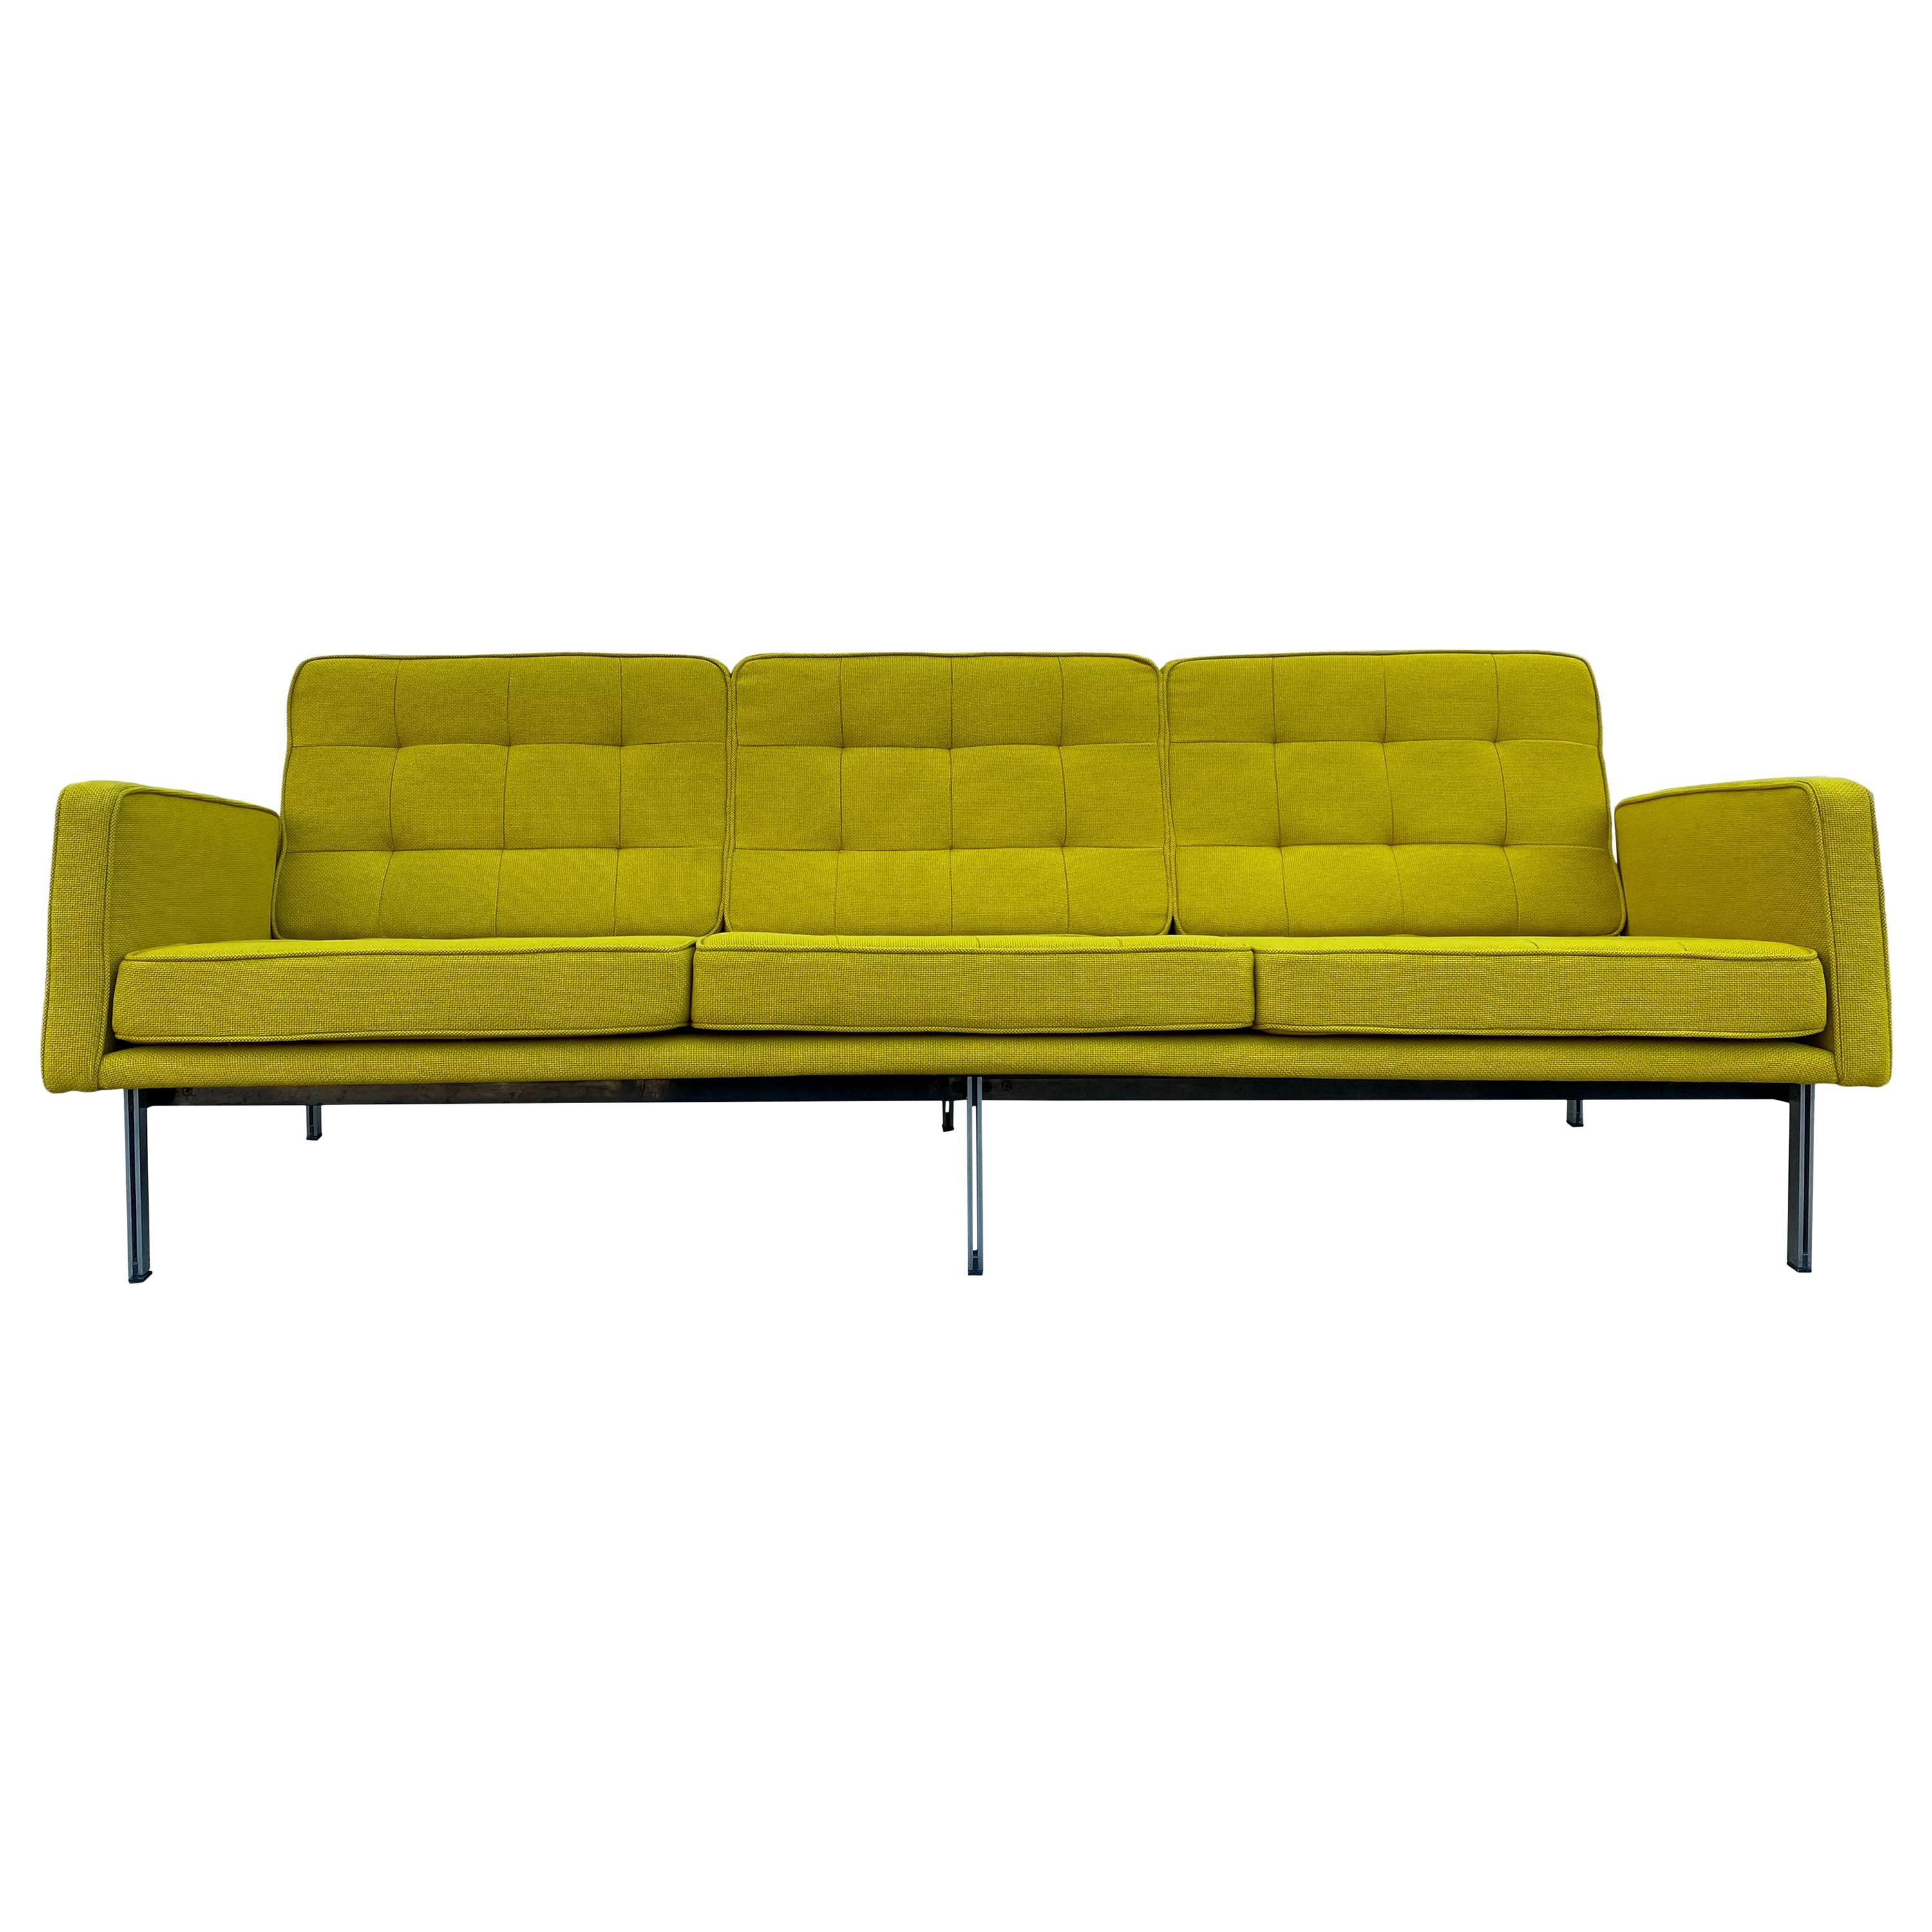 Midcentury Florence Knoll Sofa #57 Parallel Bar System Newly Restored